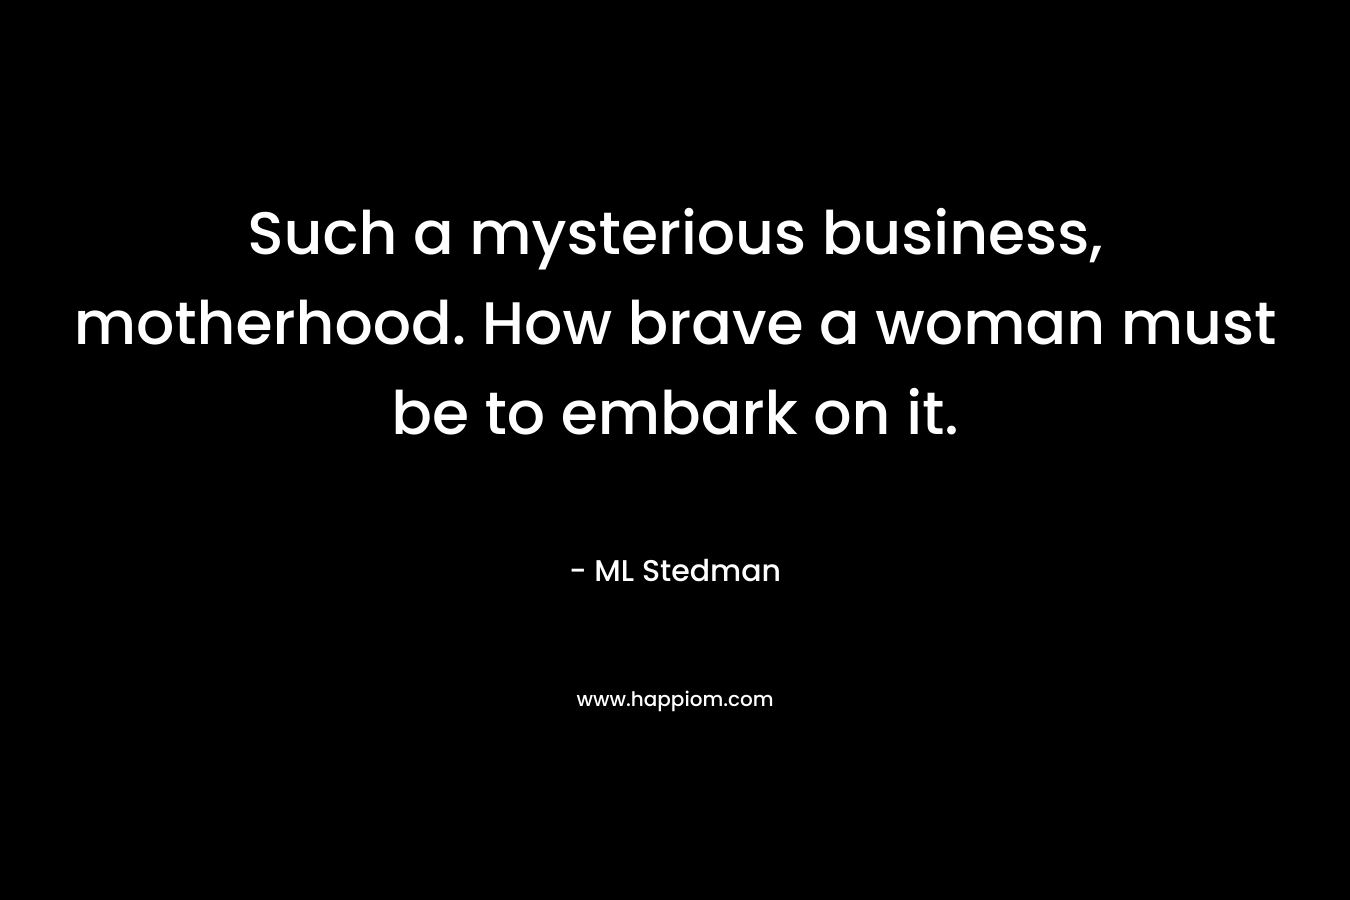 Such a mysterious business, motherhood. How brave a woman must be to embark on it. – ML Stedman